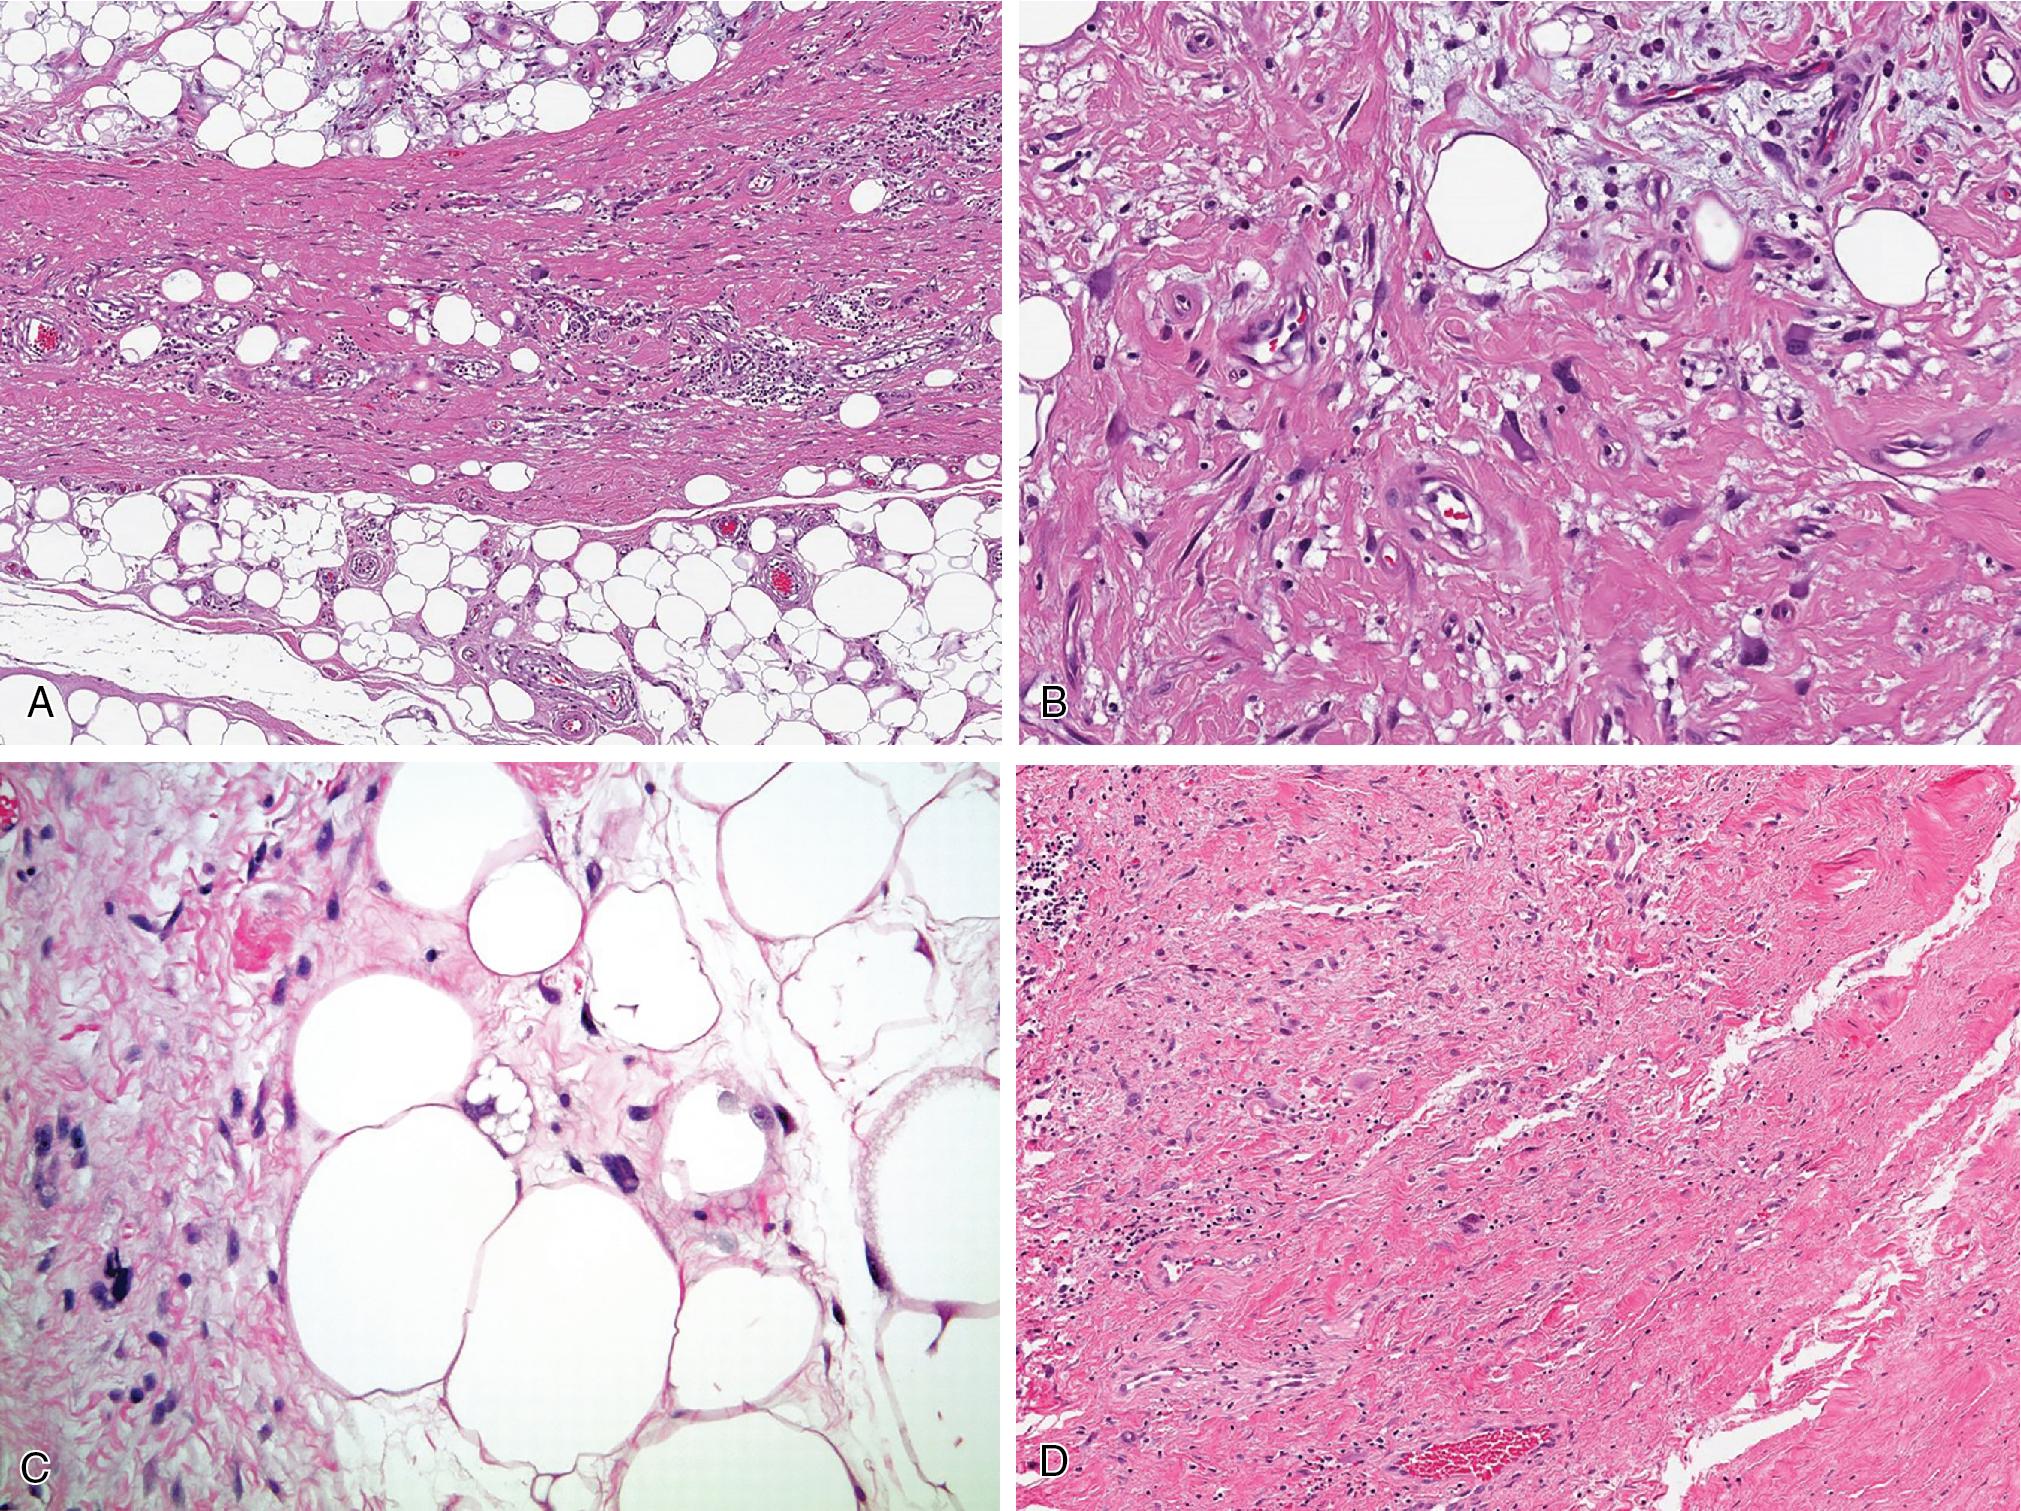 Fig. 8.9, At low power, atypical lipomatous tumor/well-differentiated liposarcoma (ALT/WDL) is characterized by variably amounts of fibrous and adipose tissue, often displaying heterogeneity within individual adipocytes (A) . Atypical, enlarged, and often multinucleated cells are within fibrous tissue and adjacent to adipocytes (B) . Less commonly, multivacuolated lipoblasts are seen (C) . The sclerosing variant of ALT/WDL is composed predominantly of dense, hypocellular fibrous tissue but retains the characteristic atypical and enlarged multinucleated cells (D) .